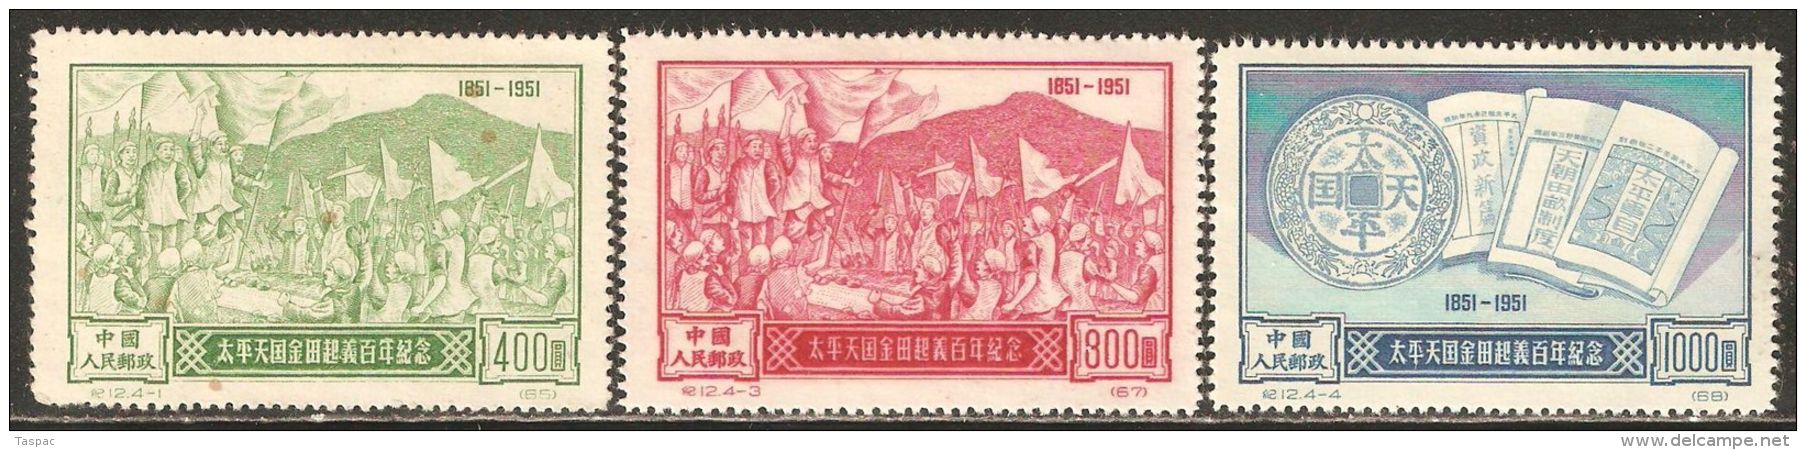 China P.R. 1951 Mi# 129-130, 132 II (*) Mint No Gum, Hinged - Reprints - Short Set - Cent. Of Taiping Peasant Rebell - Ristampe Ufficiali